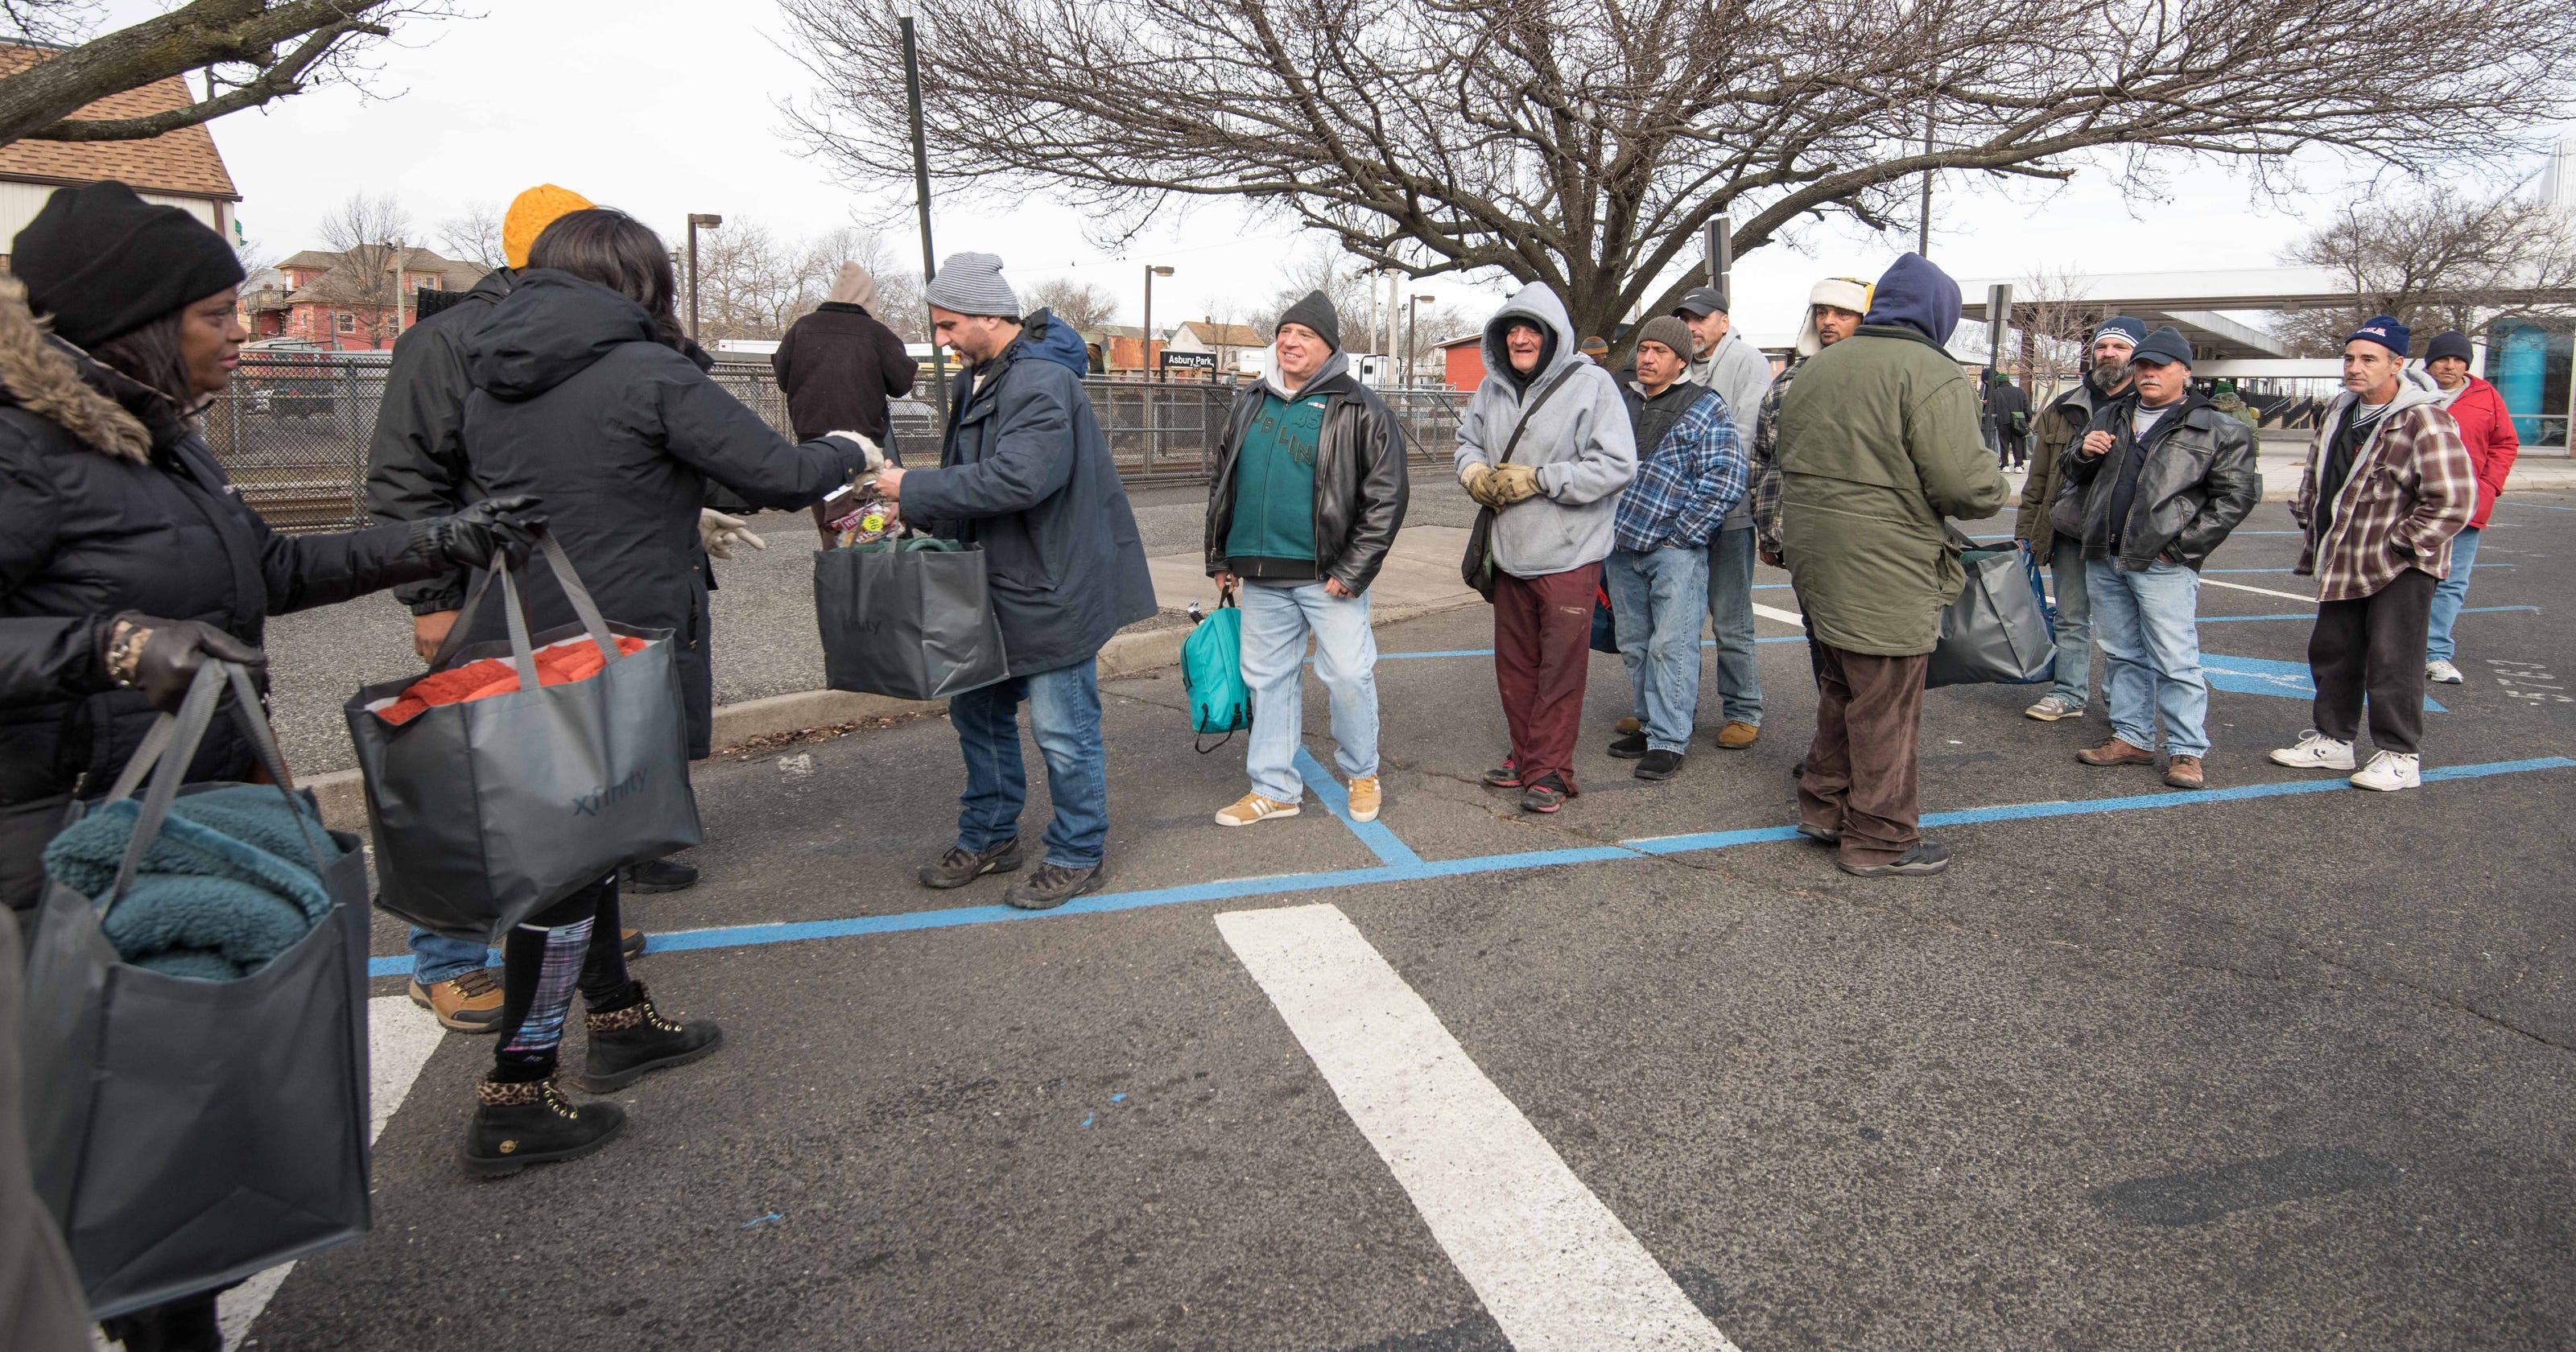 A crucial day for New Jersey's homeless